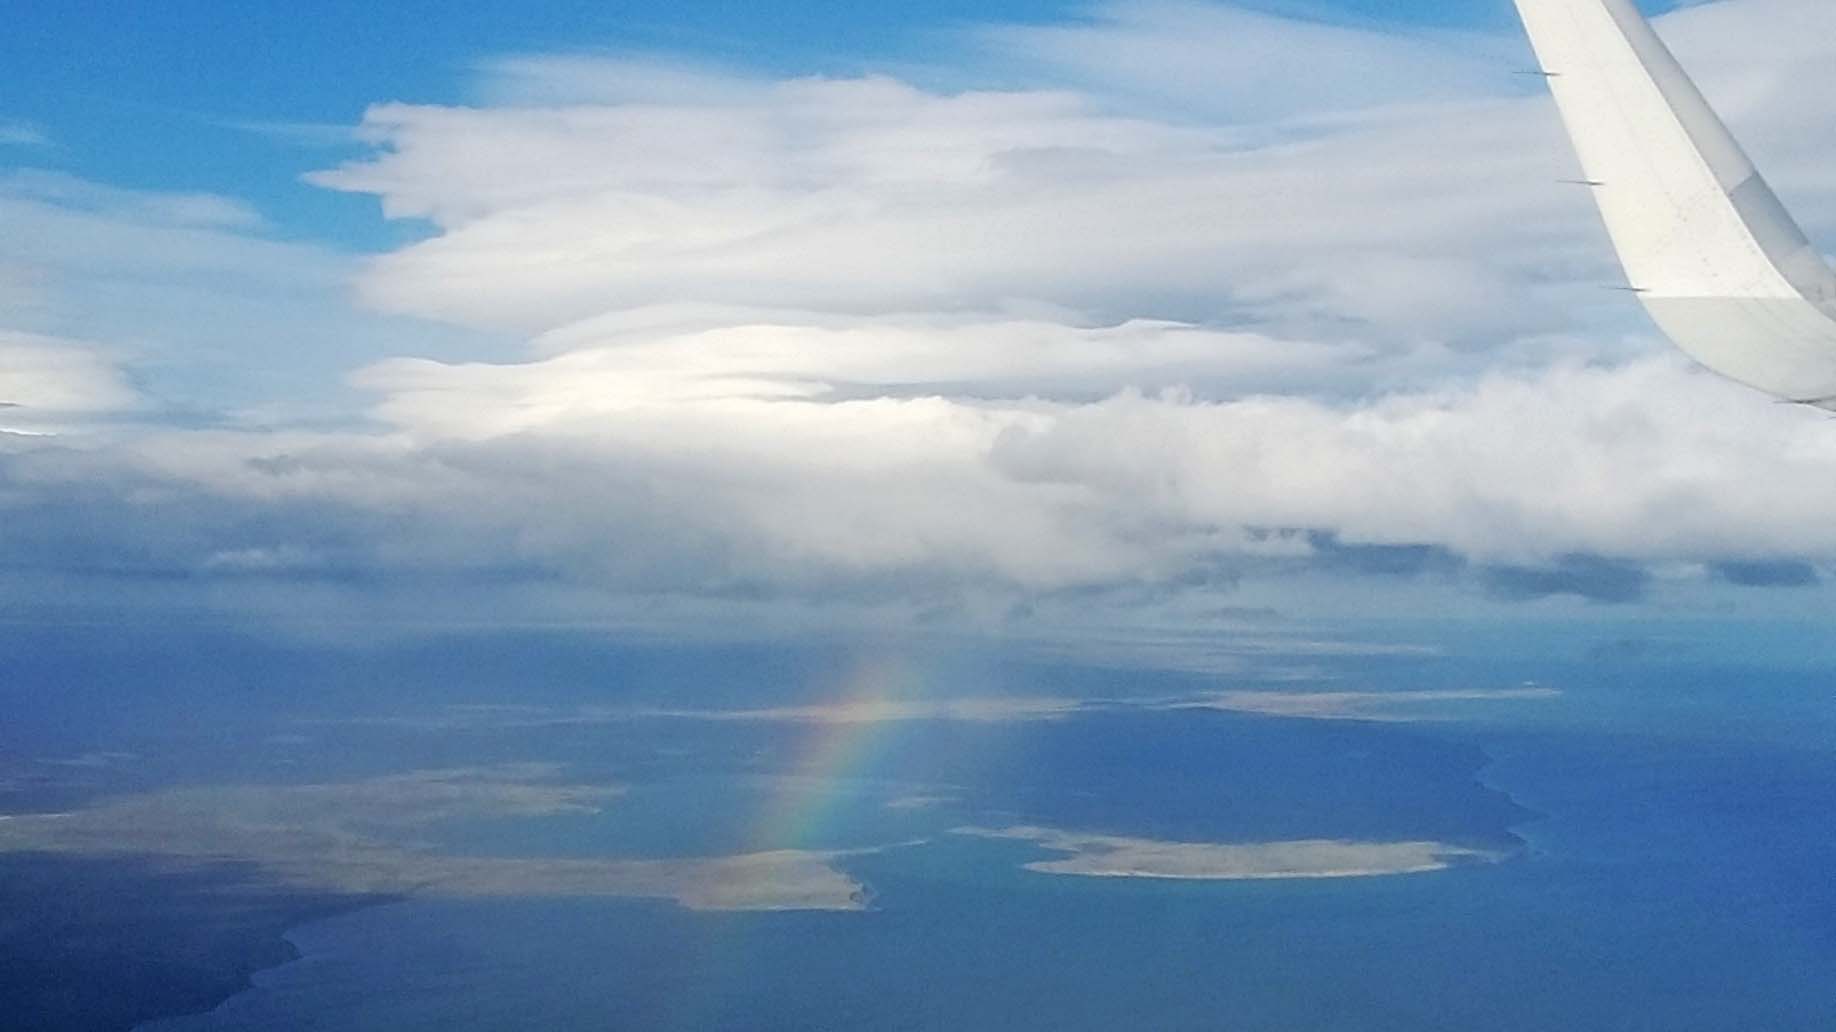 A rainbow-forming shower cloud during descent for Punta Arenas airport